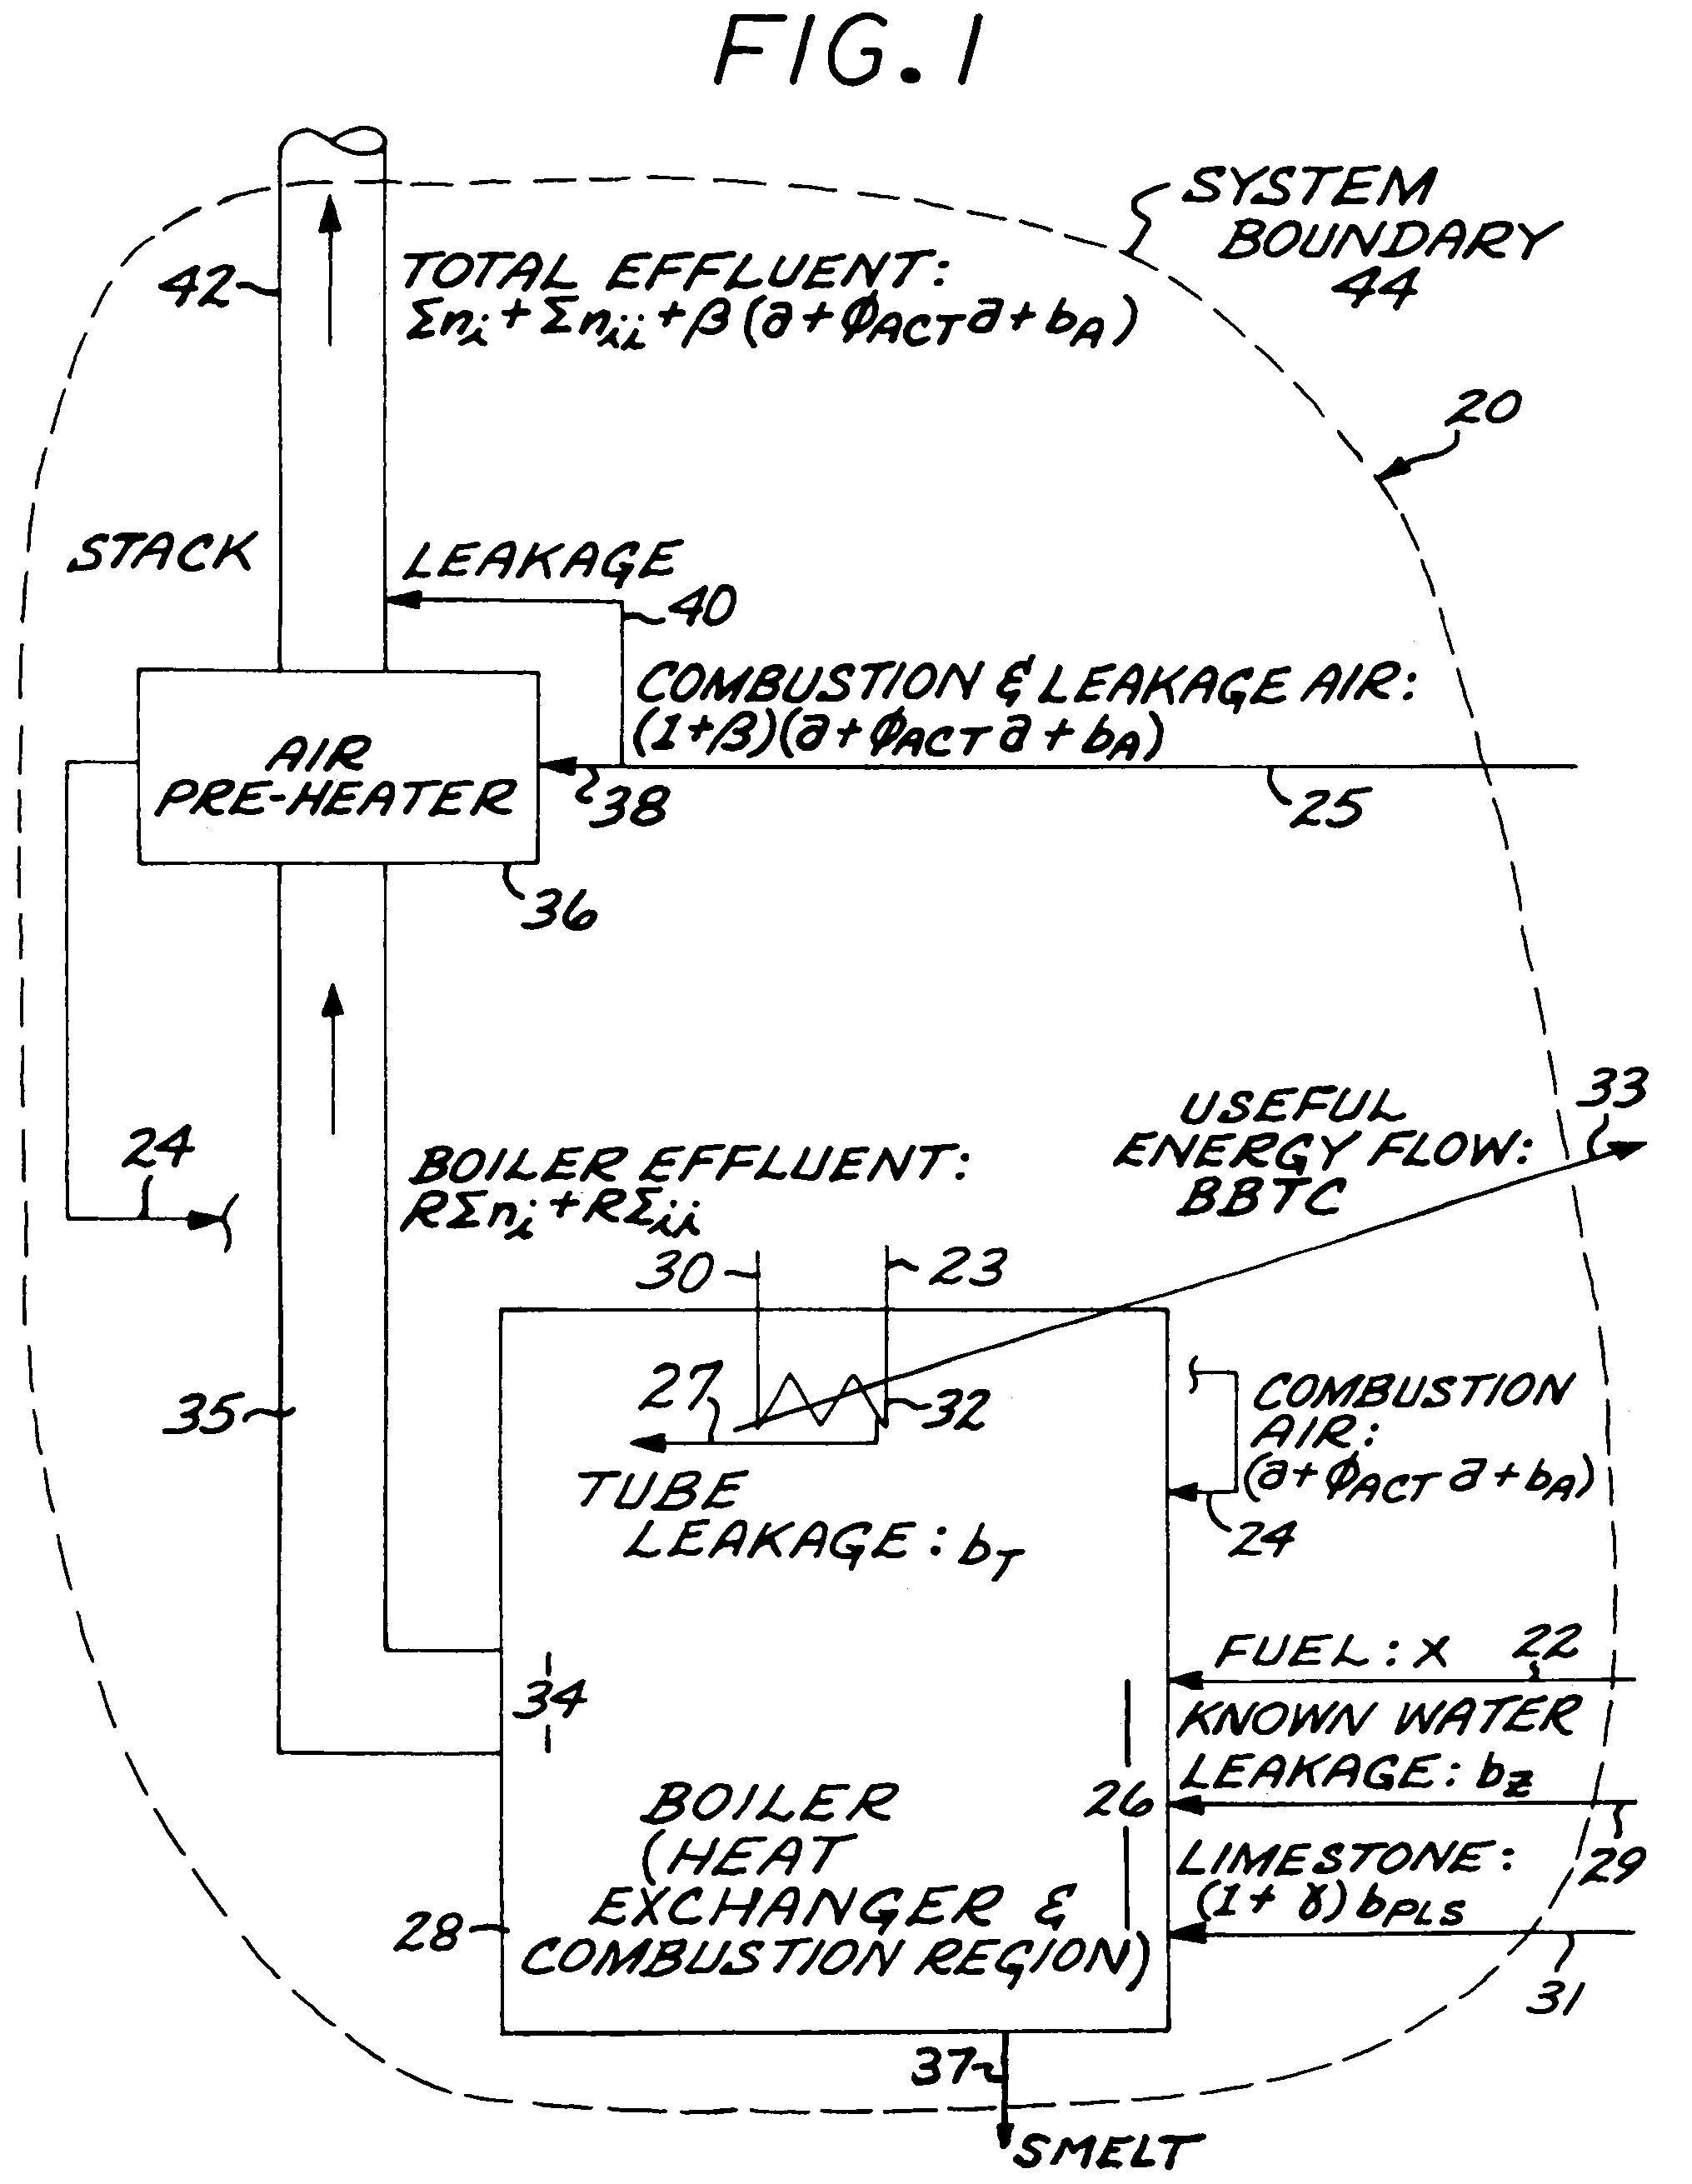 Method for detecting heat exchanger tube failures and their location when using input/loss performance monitoring of a recovery boiler